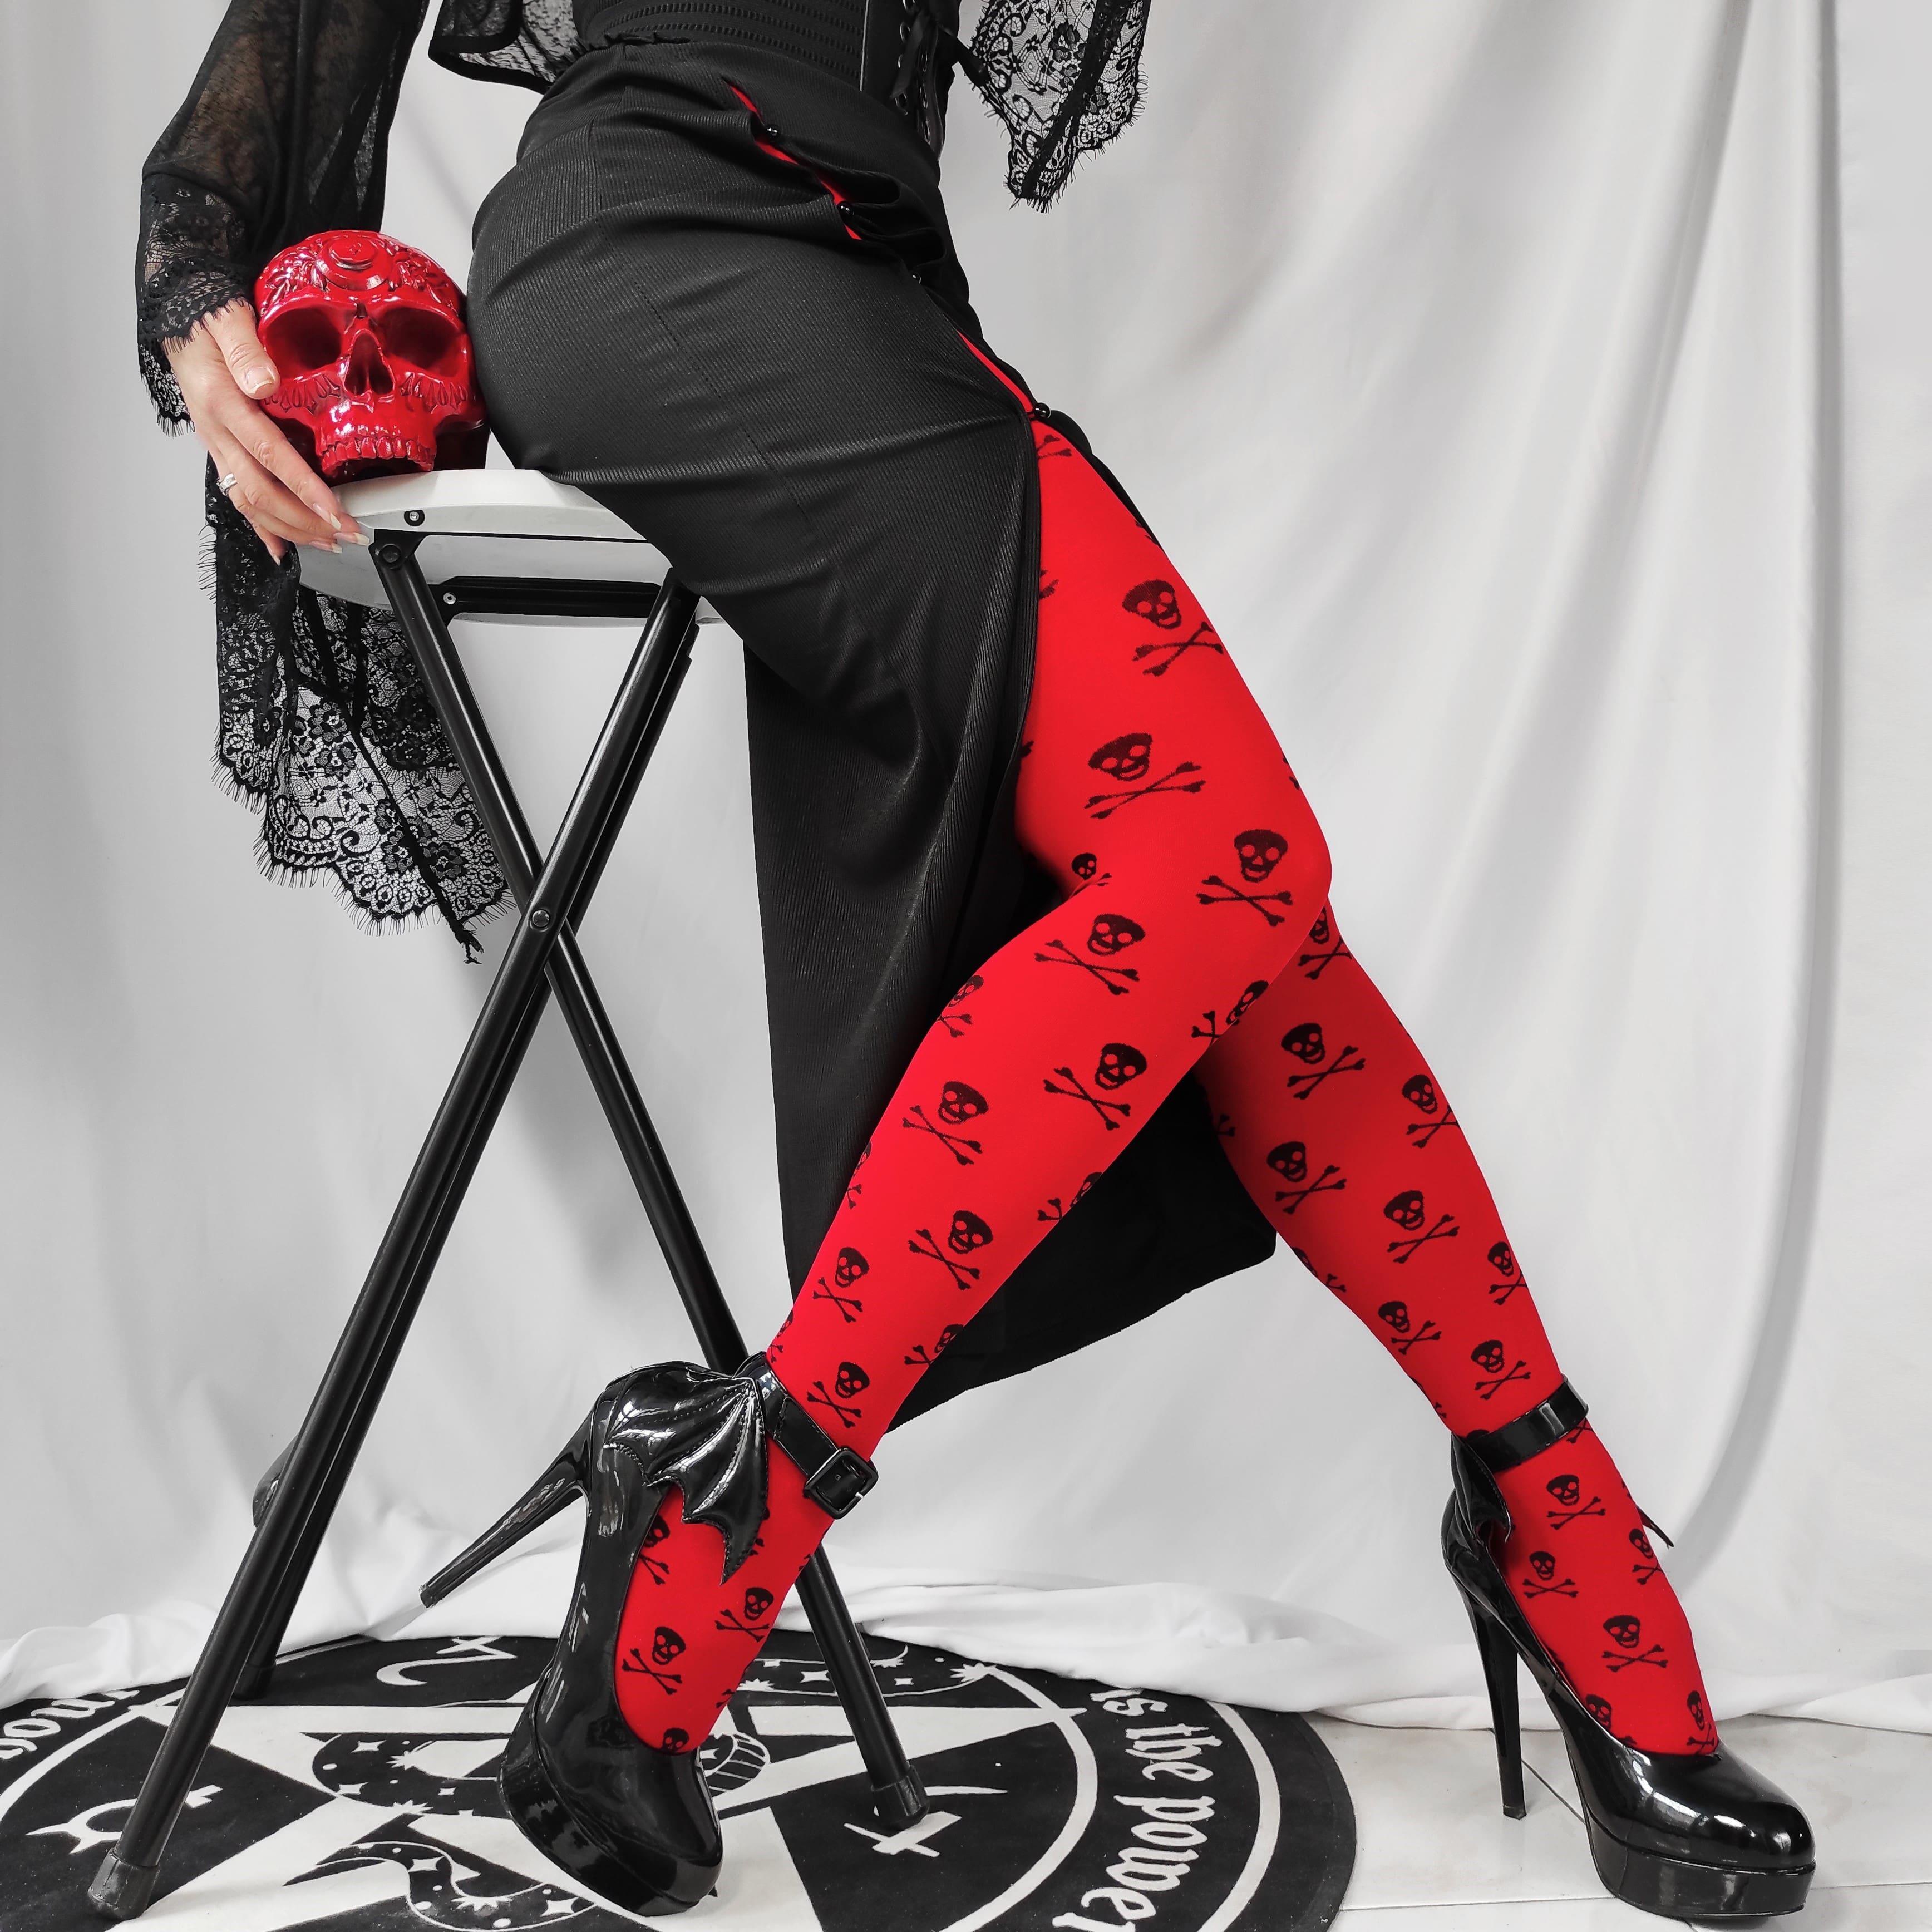 Skull Patterned Red Coloured Tights